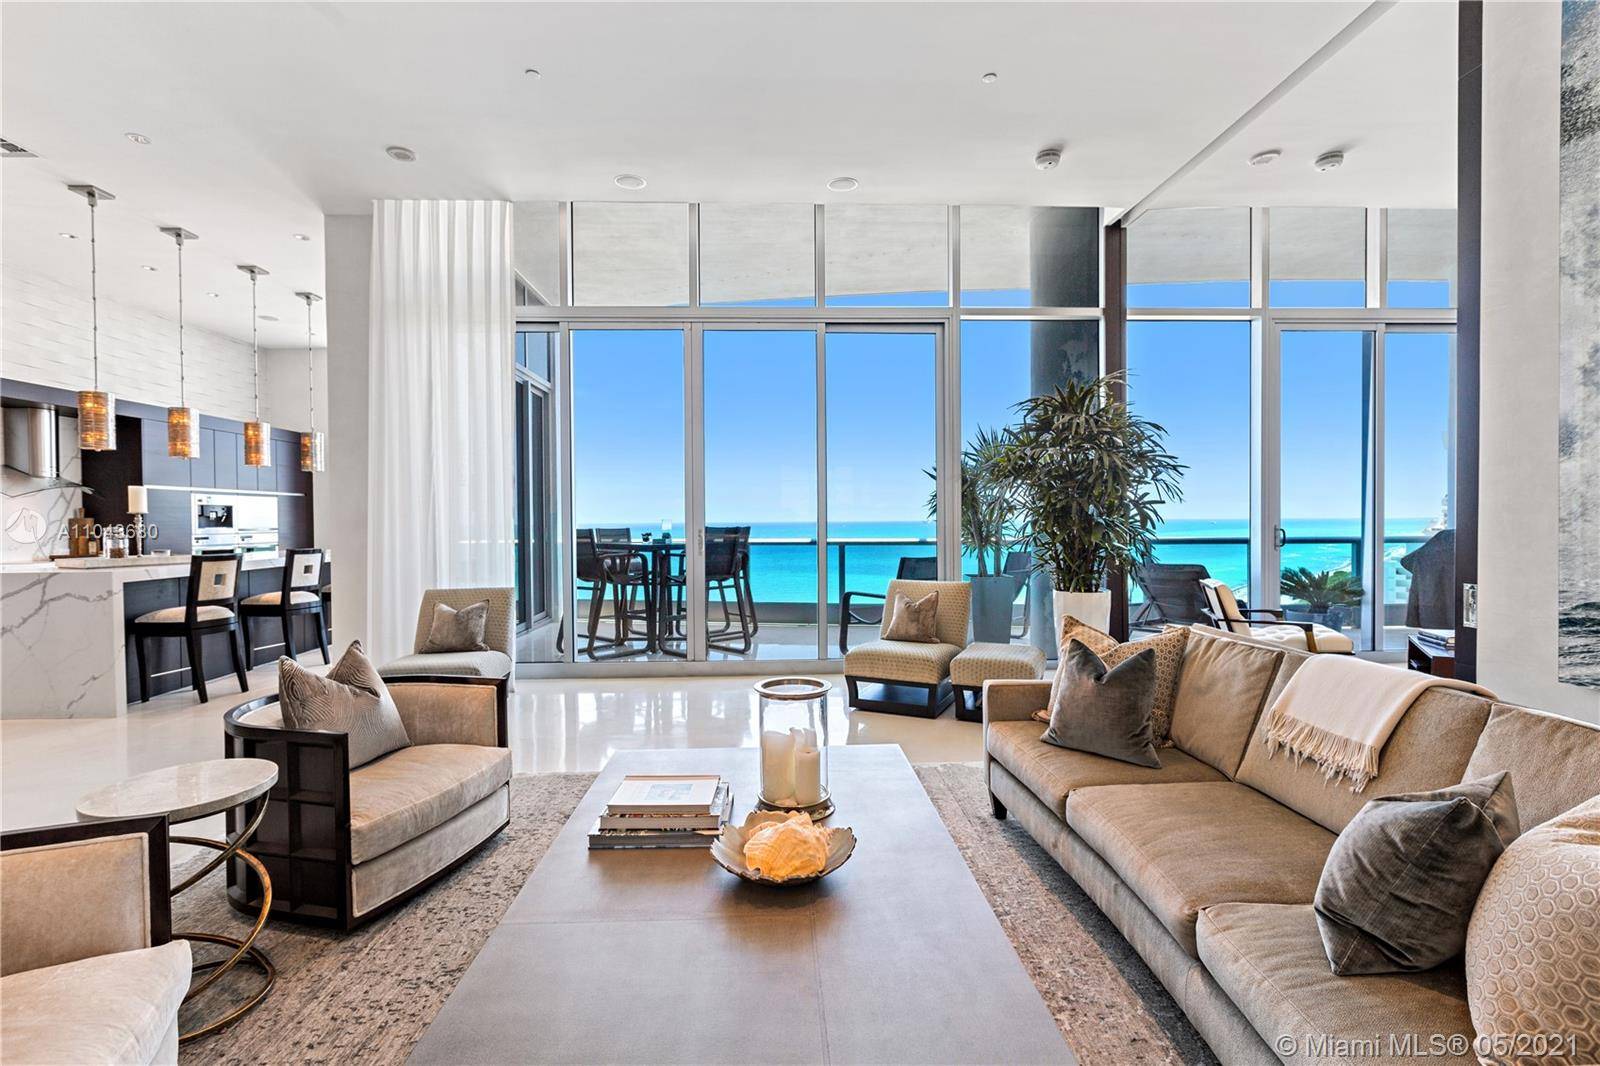 DIRECT OCEAN VIEWS FROM MODERN PH WITH SOARING 13 FOOT HIGH CEILINGS OFFER AN INCREDIBLE SENSE OF OPULENCE IN OPEN FLOORPLAN FLAWLESSLY DESIGNED BY BETHANY O NEIL OF NAPLES !